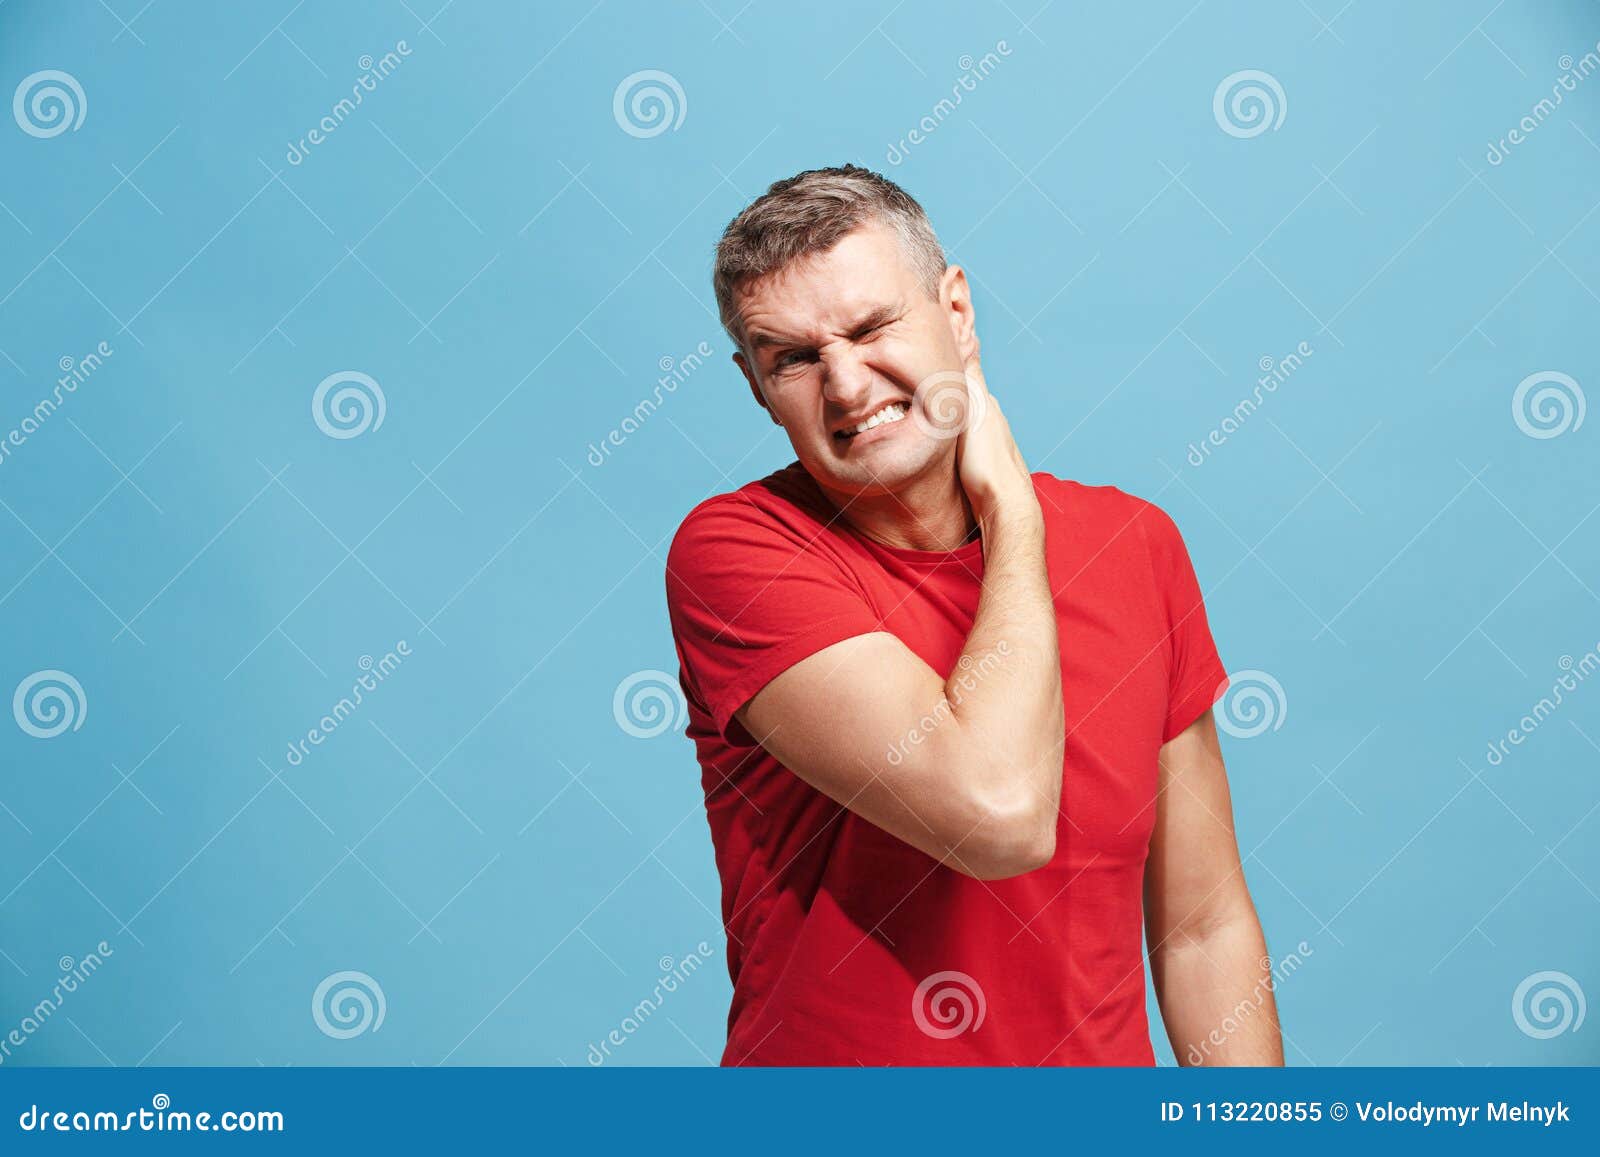 Young Man Overwhelmed with a Pain in the Neck . Stock Image - Image of ...